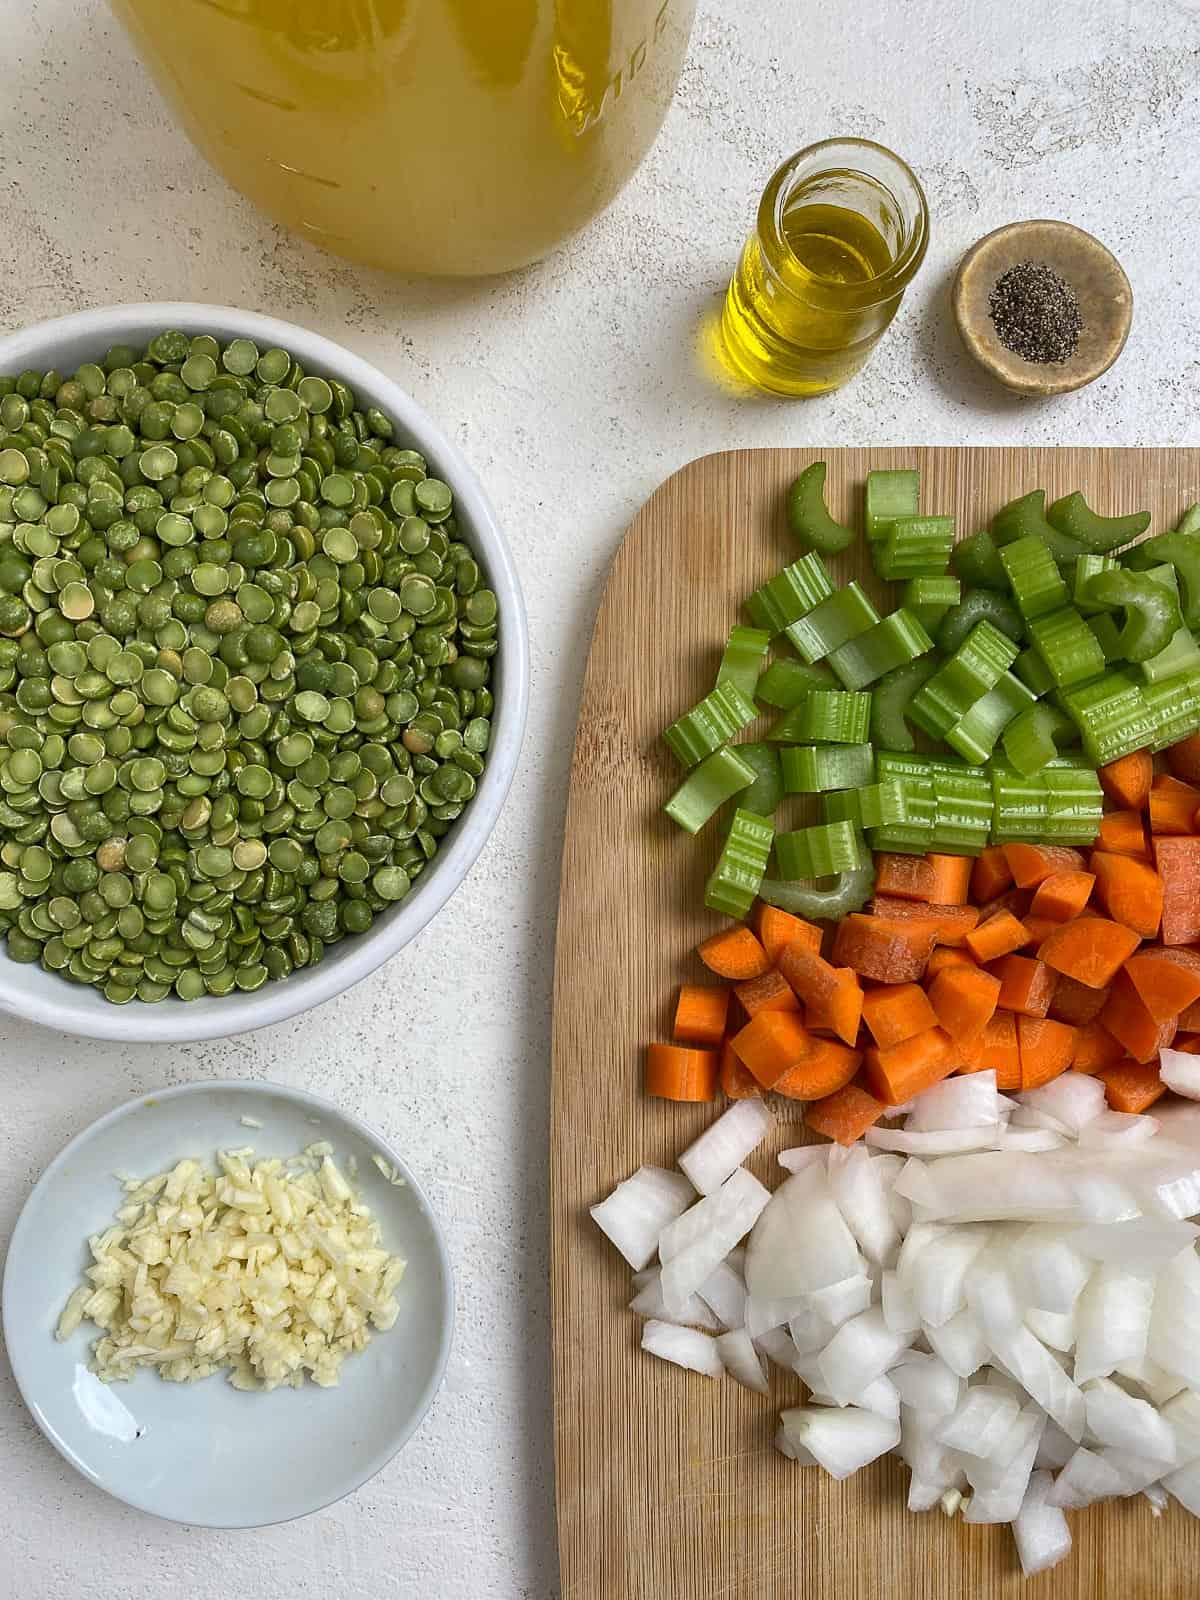 ingredients for Vegan Split Pea Soup measured out against a white surface and cutting board